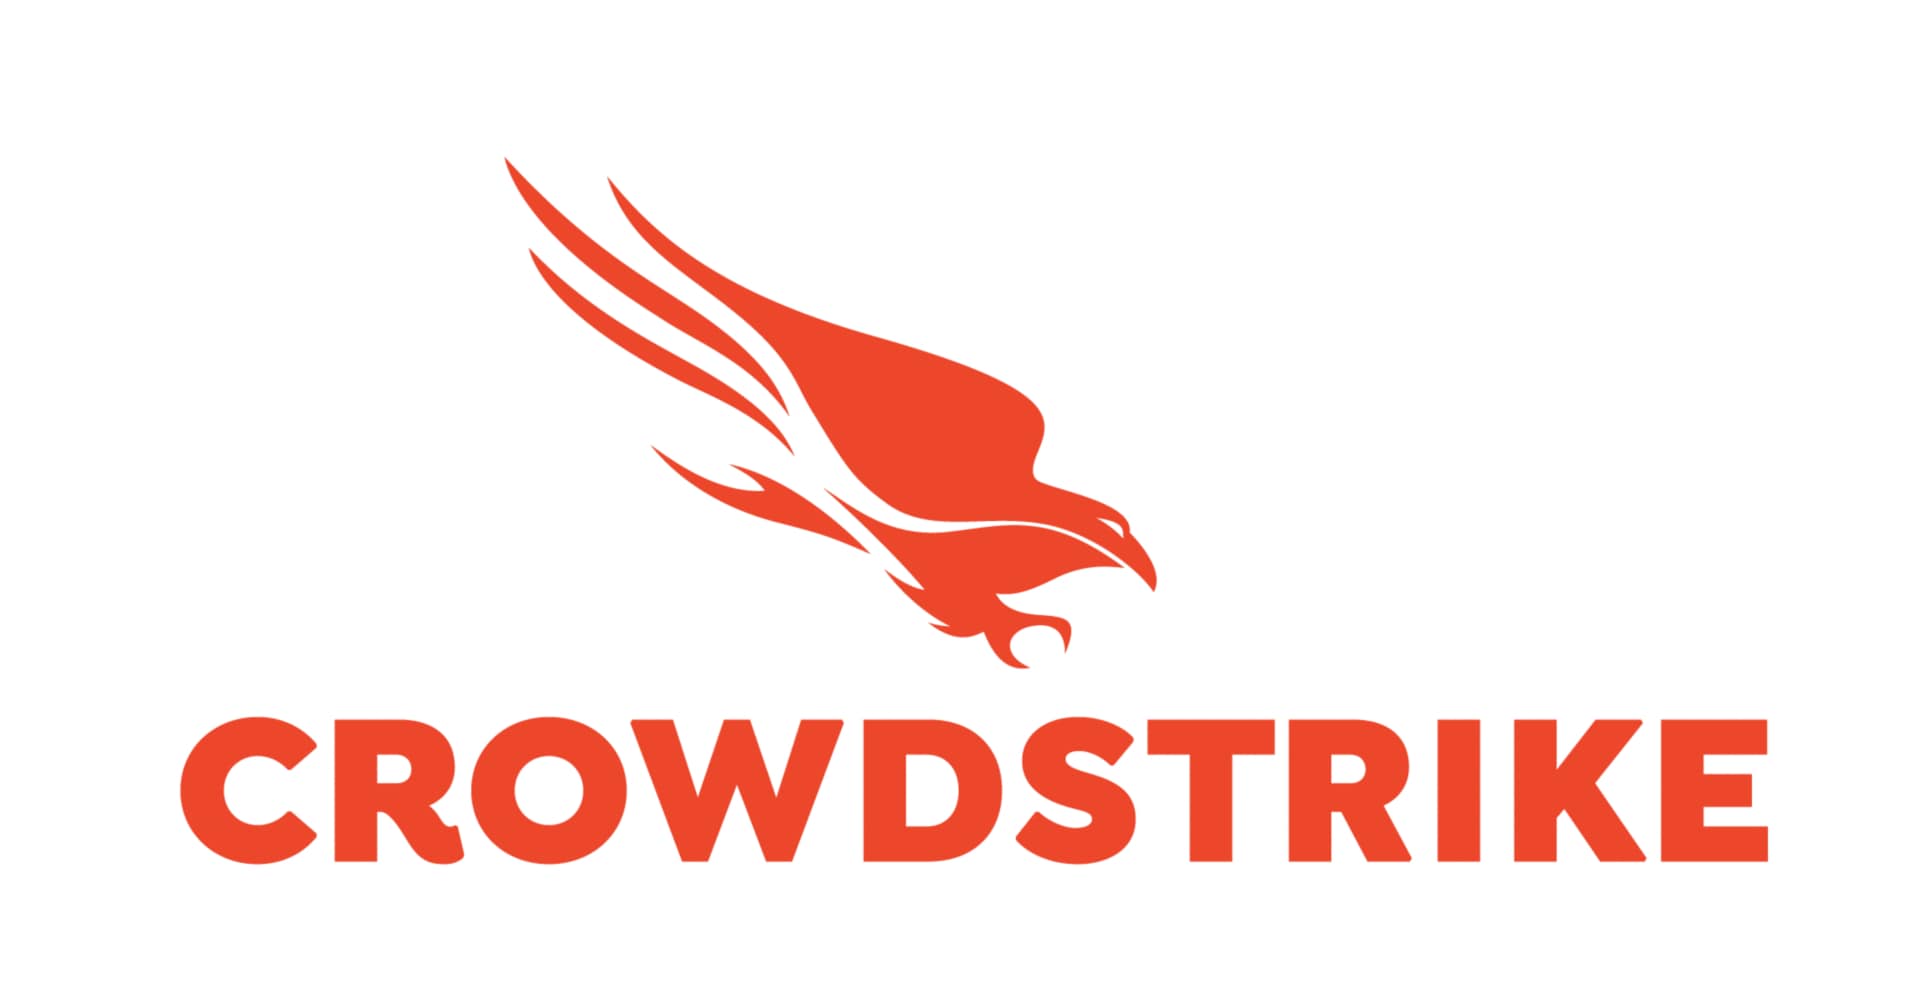 CrowdStrike 12-Month Falcon Insight (EDR) Application Software Subscription (750-999 Licenses)